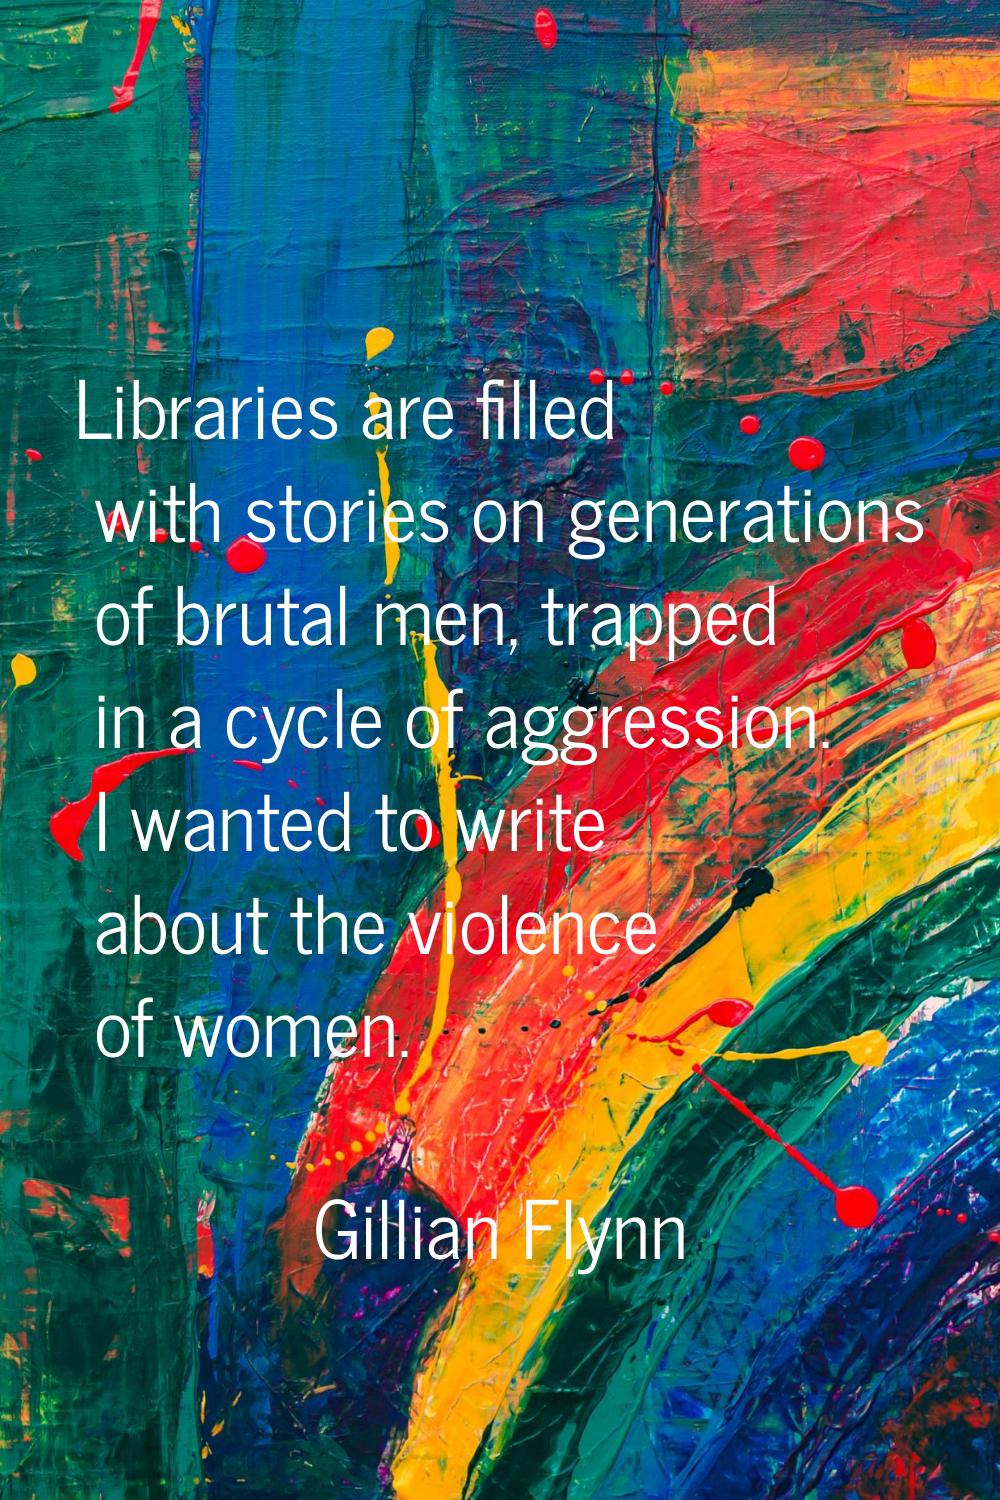 Libraries are filled with stories on generations of brutal men, trapped in a cycle of aggression. I